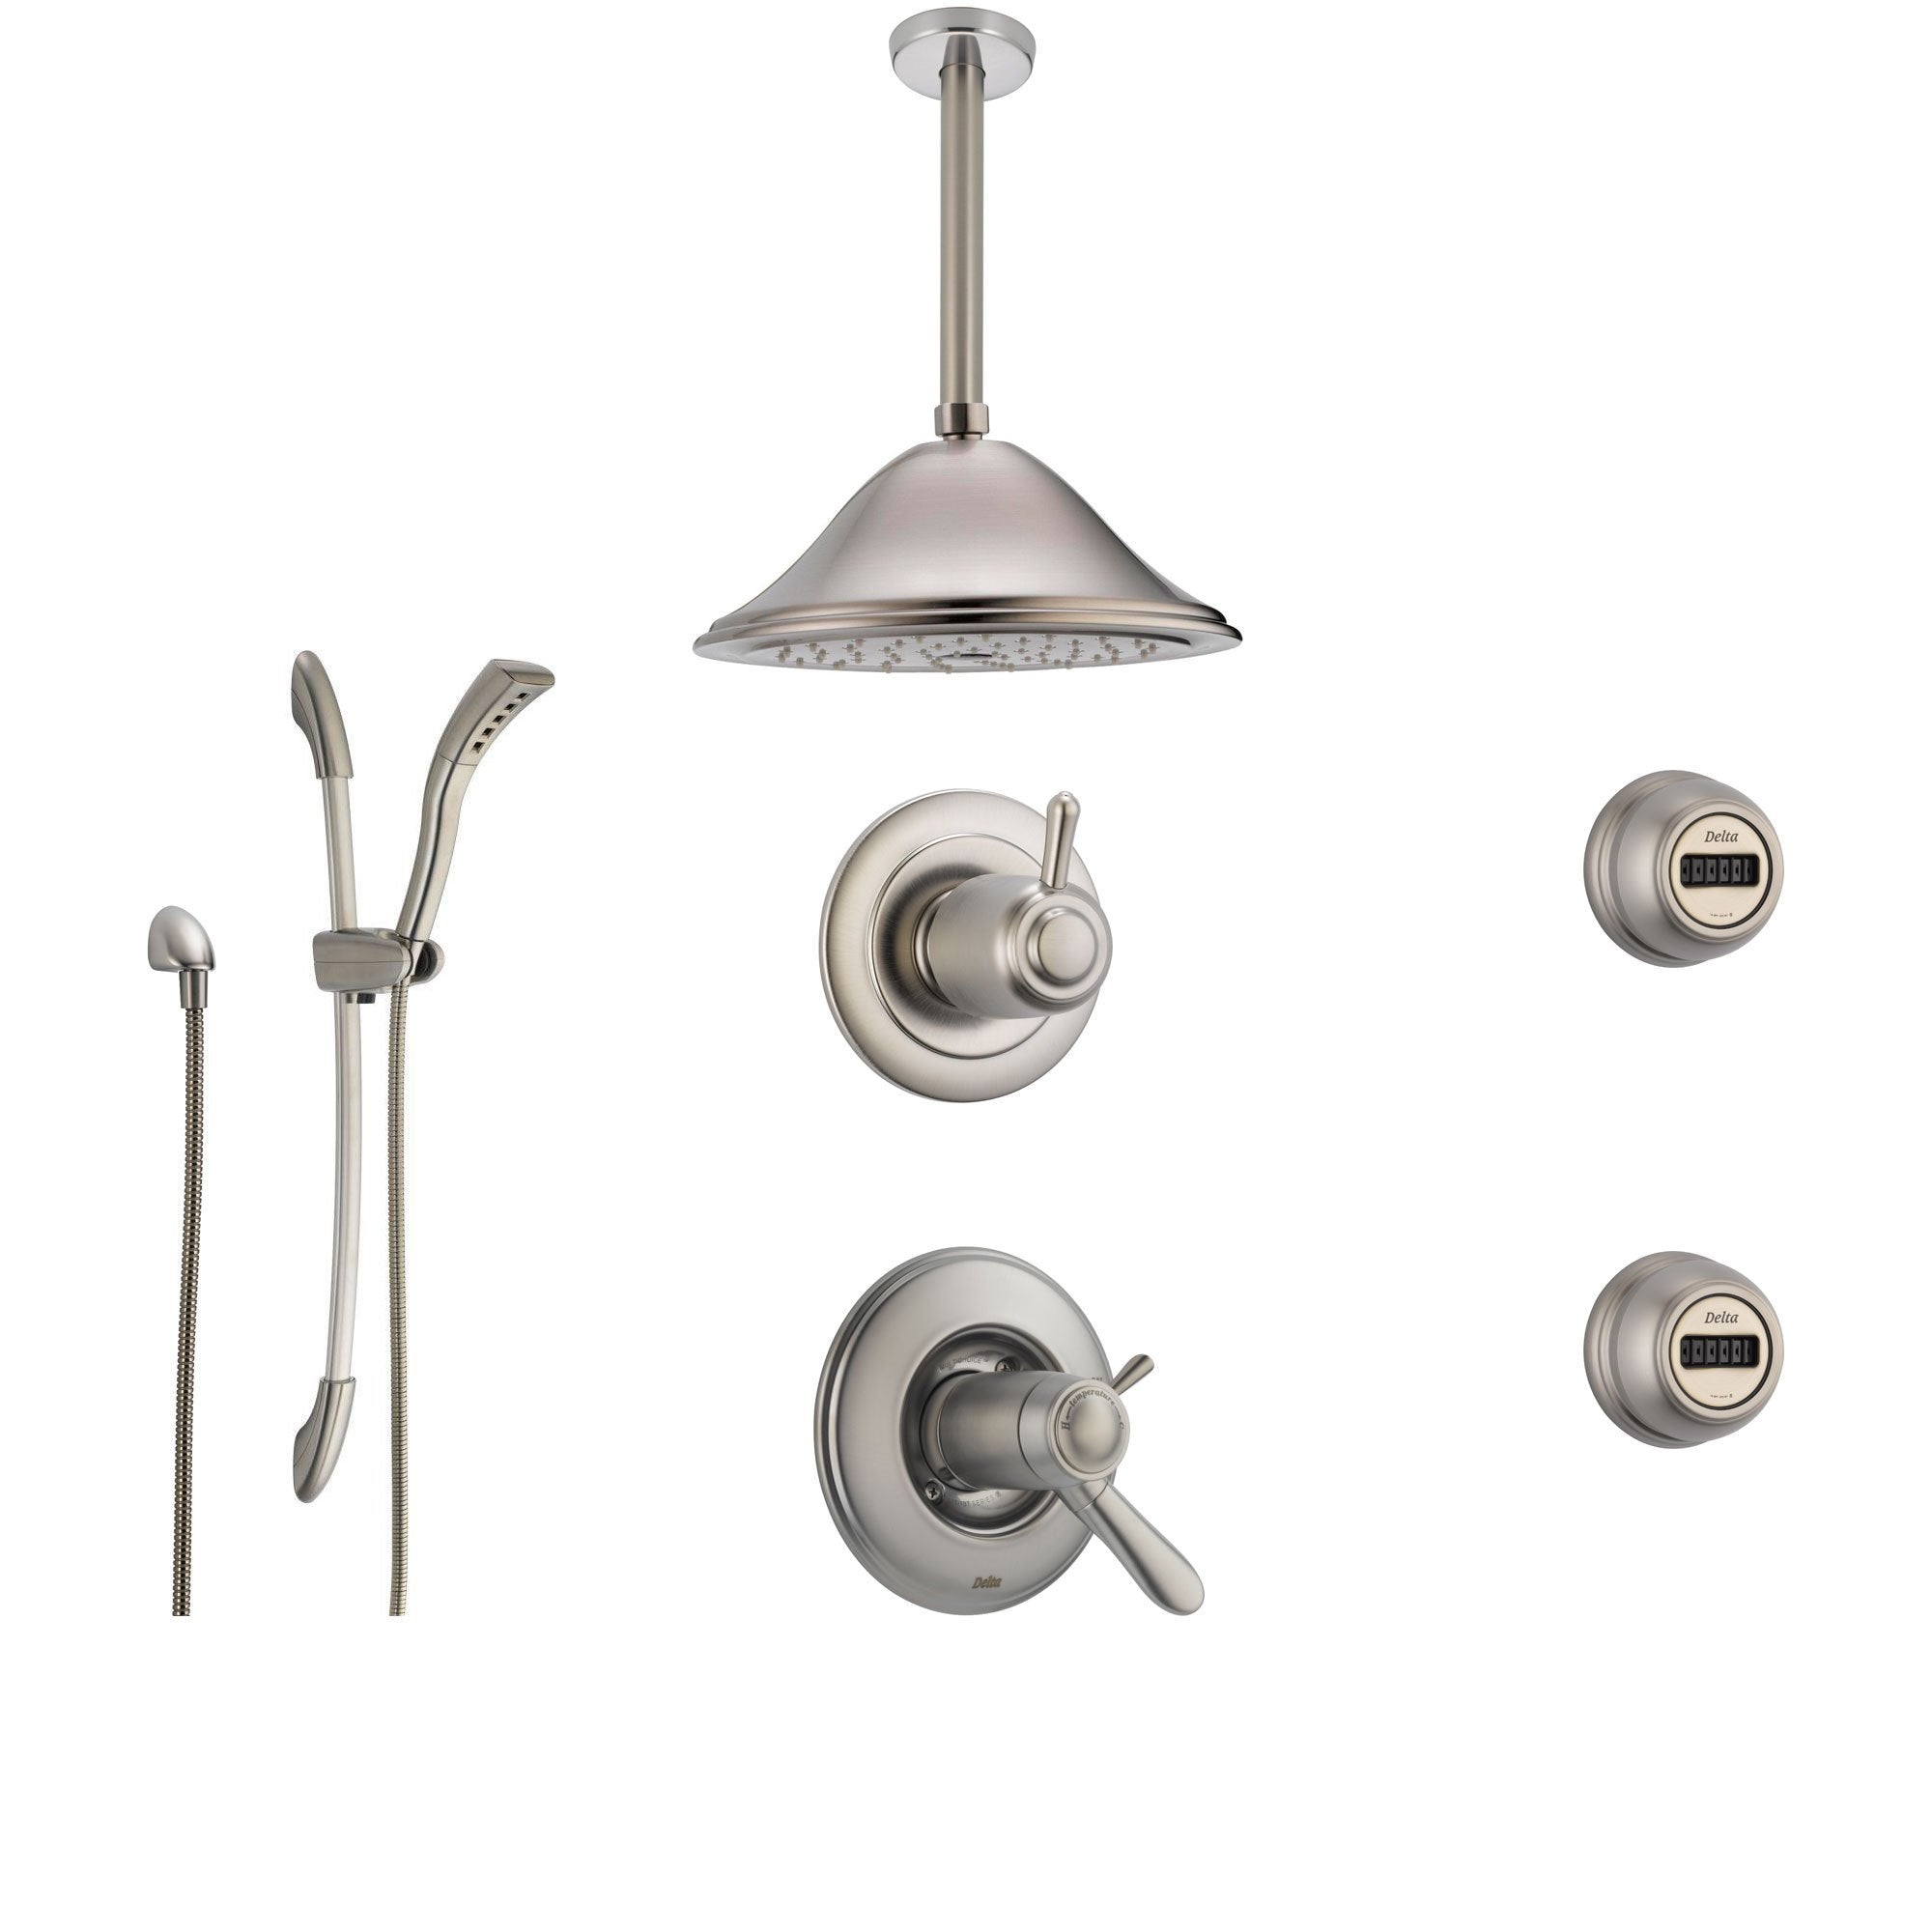 Delta Lahara Stainless Steel Shower System with Thermostatic Shower Handle, 6-setting Diverter, Large Ceiling Mount Rain Showerhead, Handheld Shower, and 2 Body Sprays SS17T3892SS